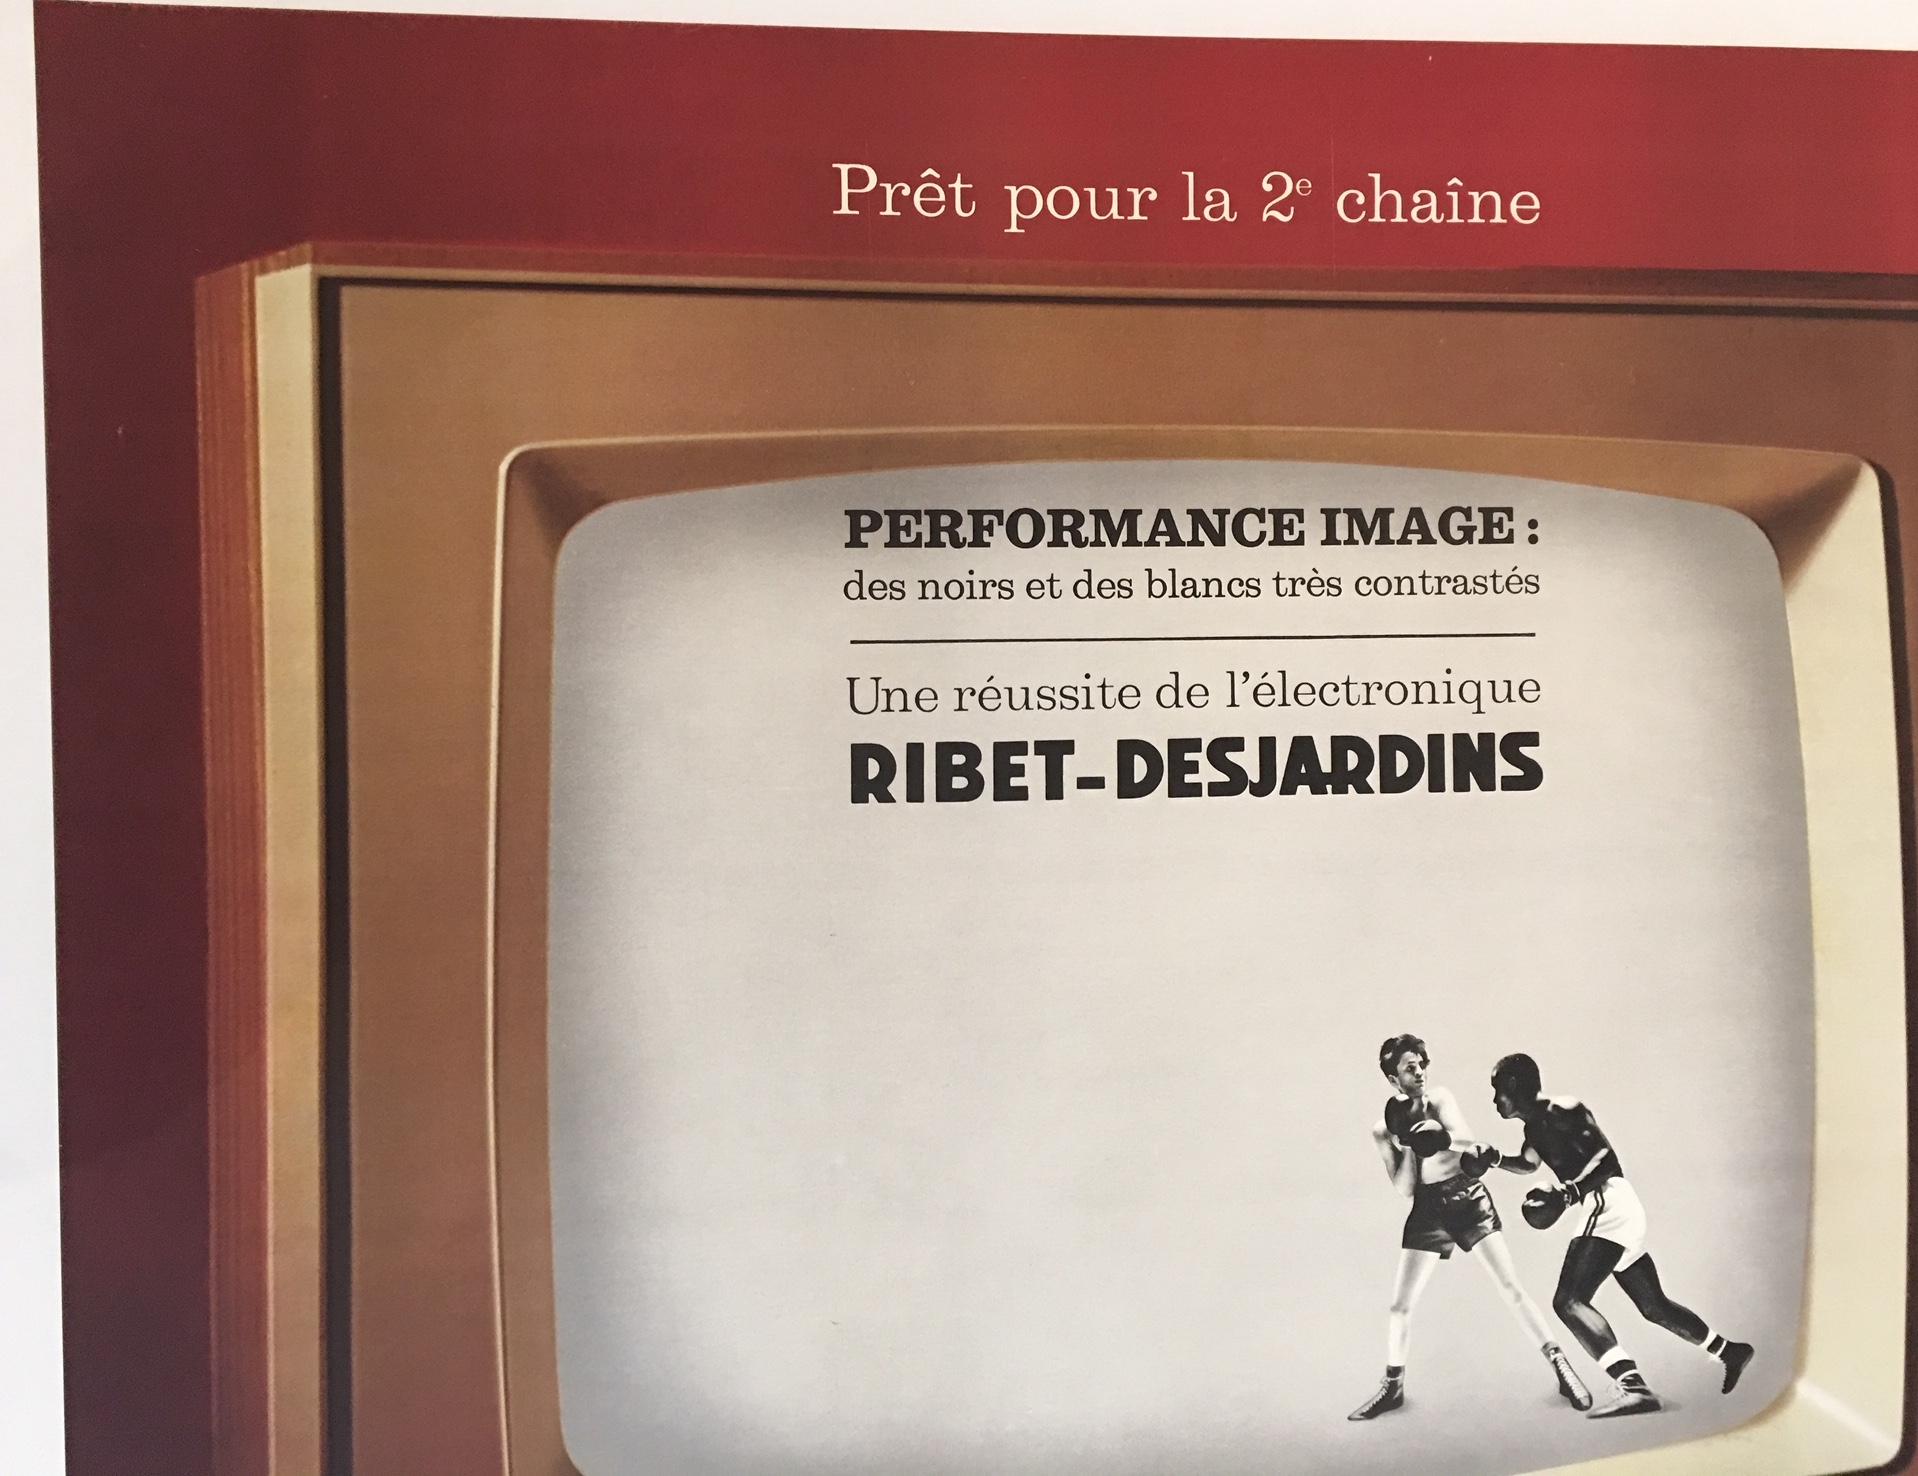 Original vintage poster for Ribet-Desjardins performance image television.

For those who want a poster packed with punch! This original vintage poster uses photographic imagery with lithographic printing

Artist: 
Anonymous

Year